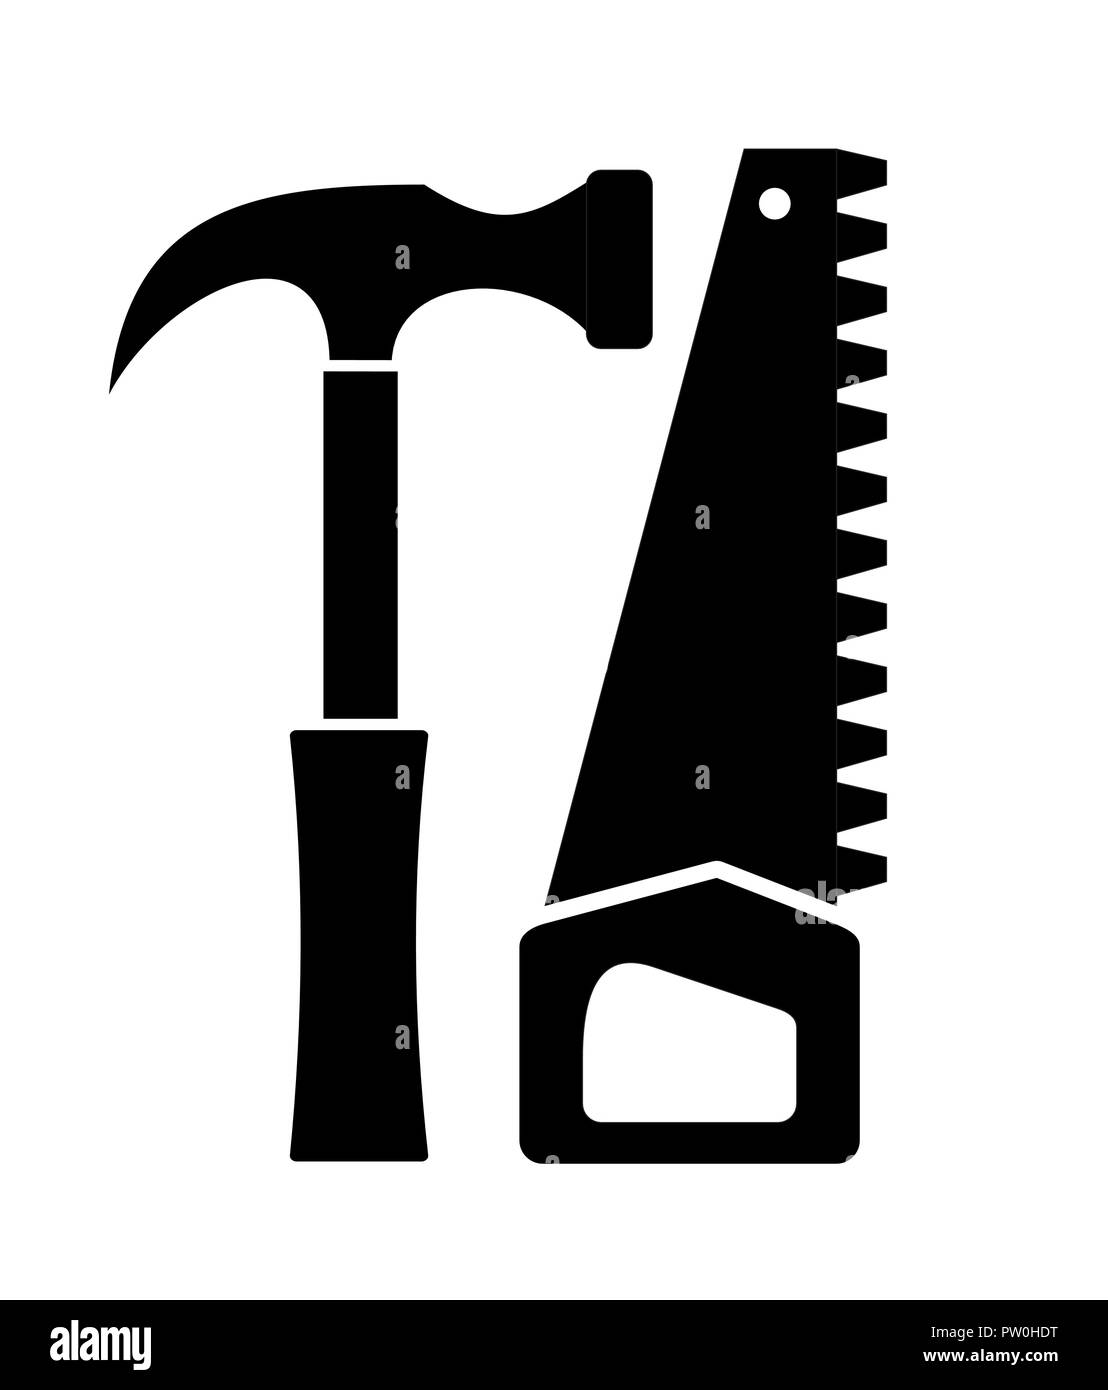 Hammer and saw vector symbol or sign isolated design Stock Vector